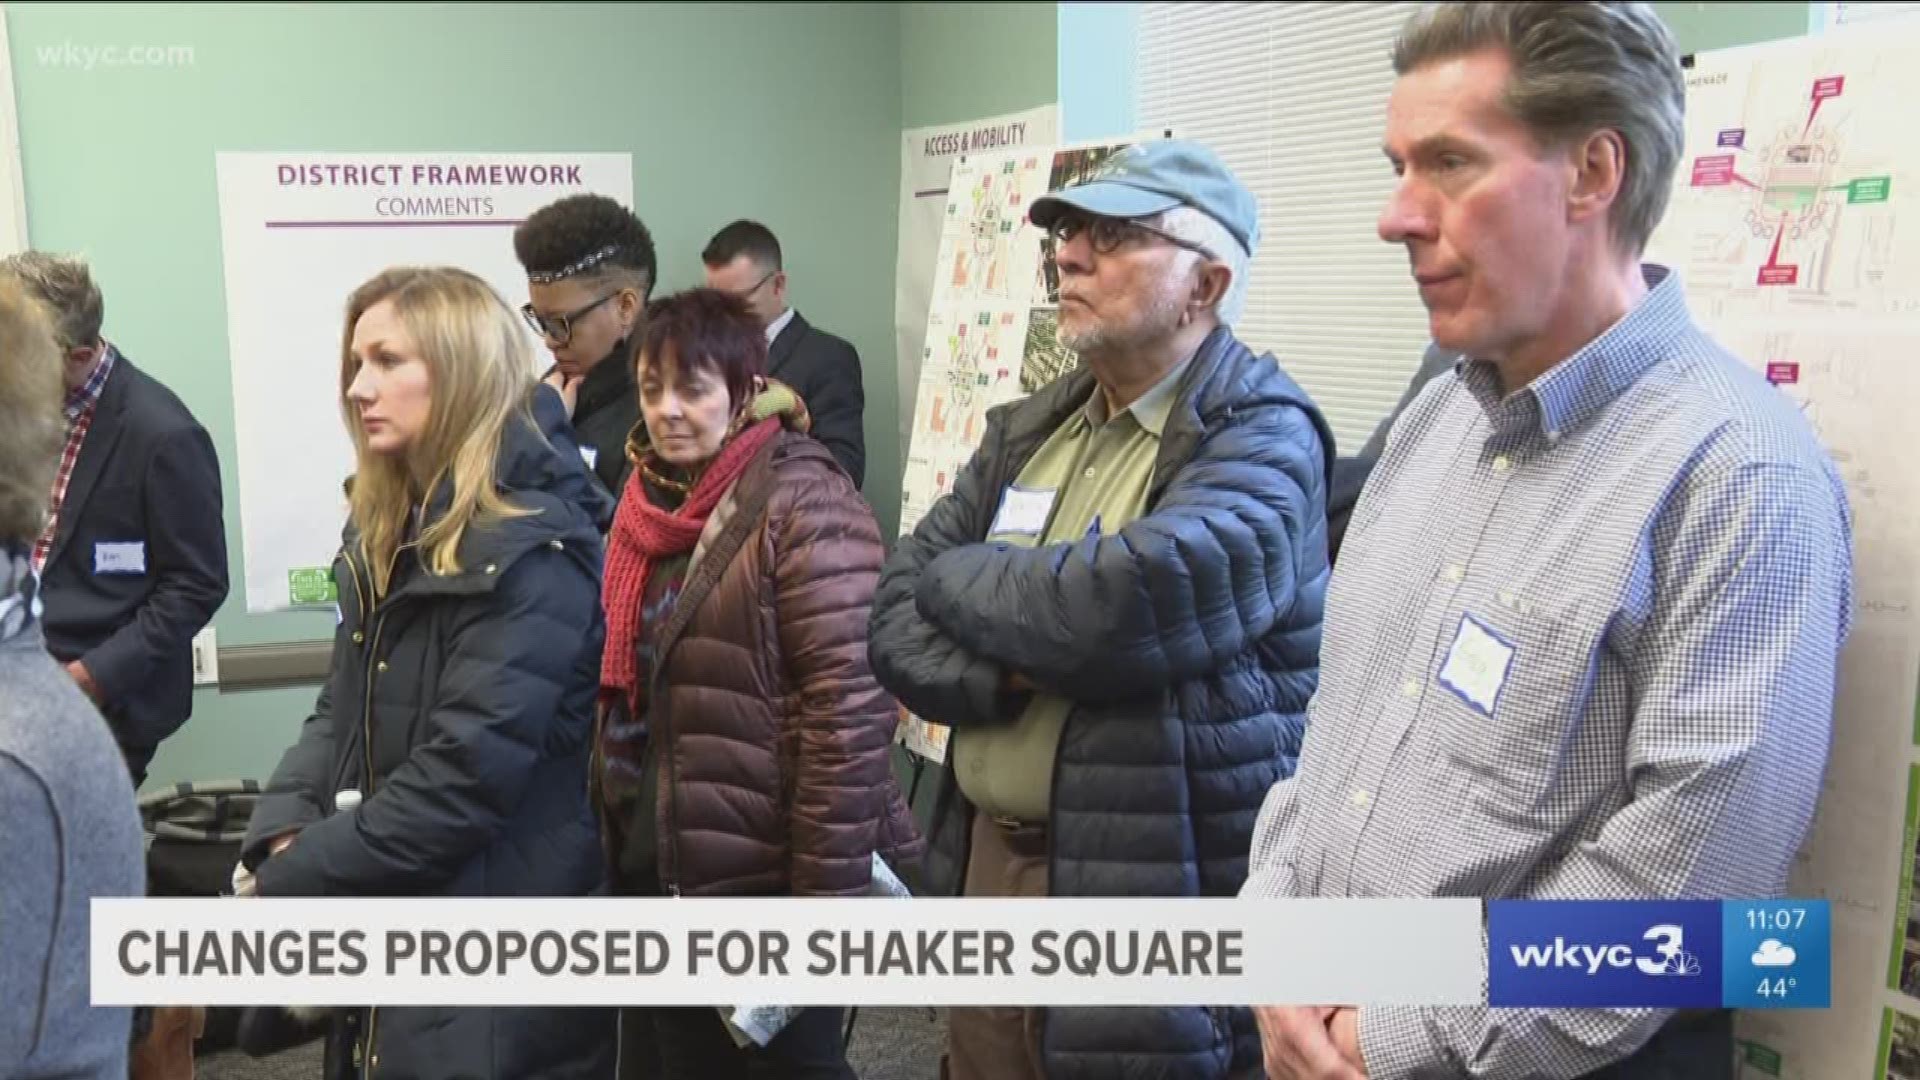 The $400,000 project would revamp Shaker Square, though two of four concept designs would remove Shaker Blvd. from the square's center. Ray Strickland reports.